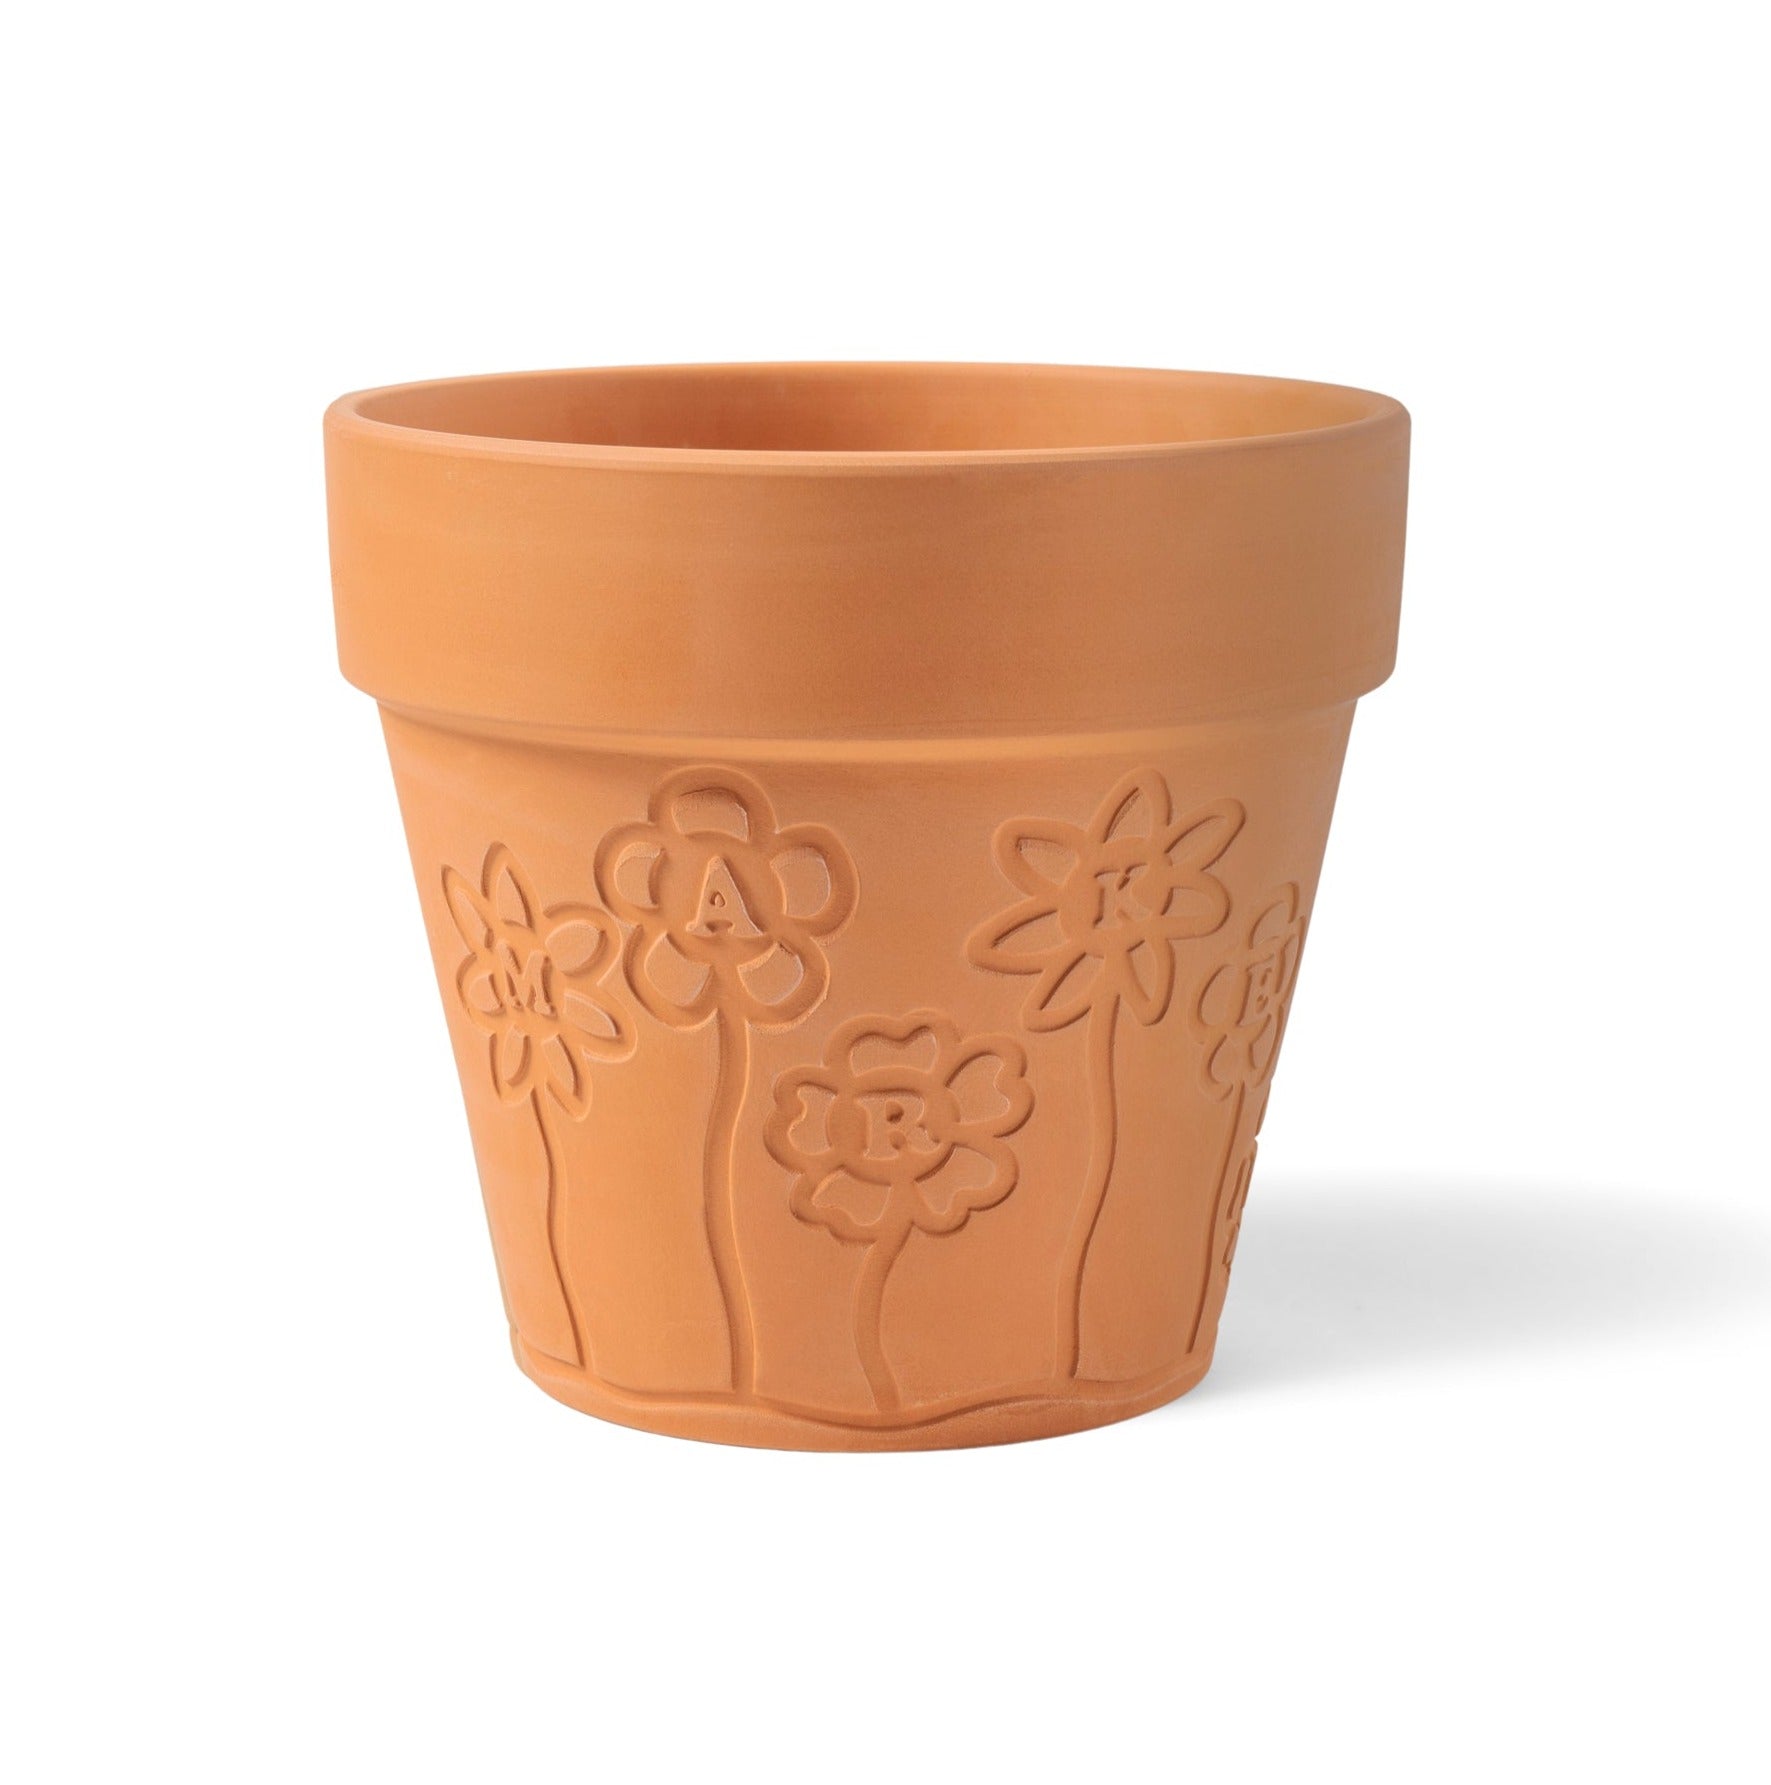 MARKET clothing brand FLOWER POWER TERRA COTTA PLANTER. Find more homegoods and graphic tees at MarketStudios.com. Formally Chinatown Market. 